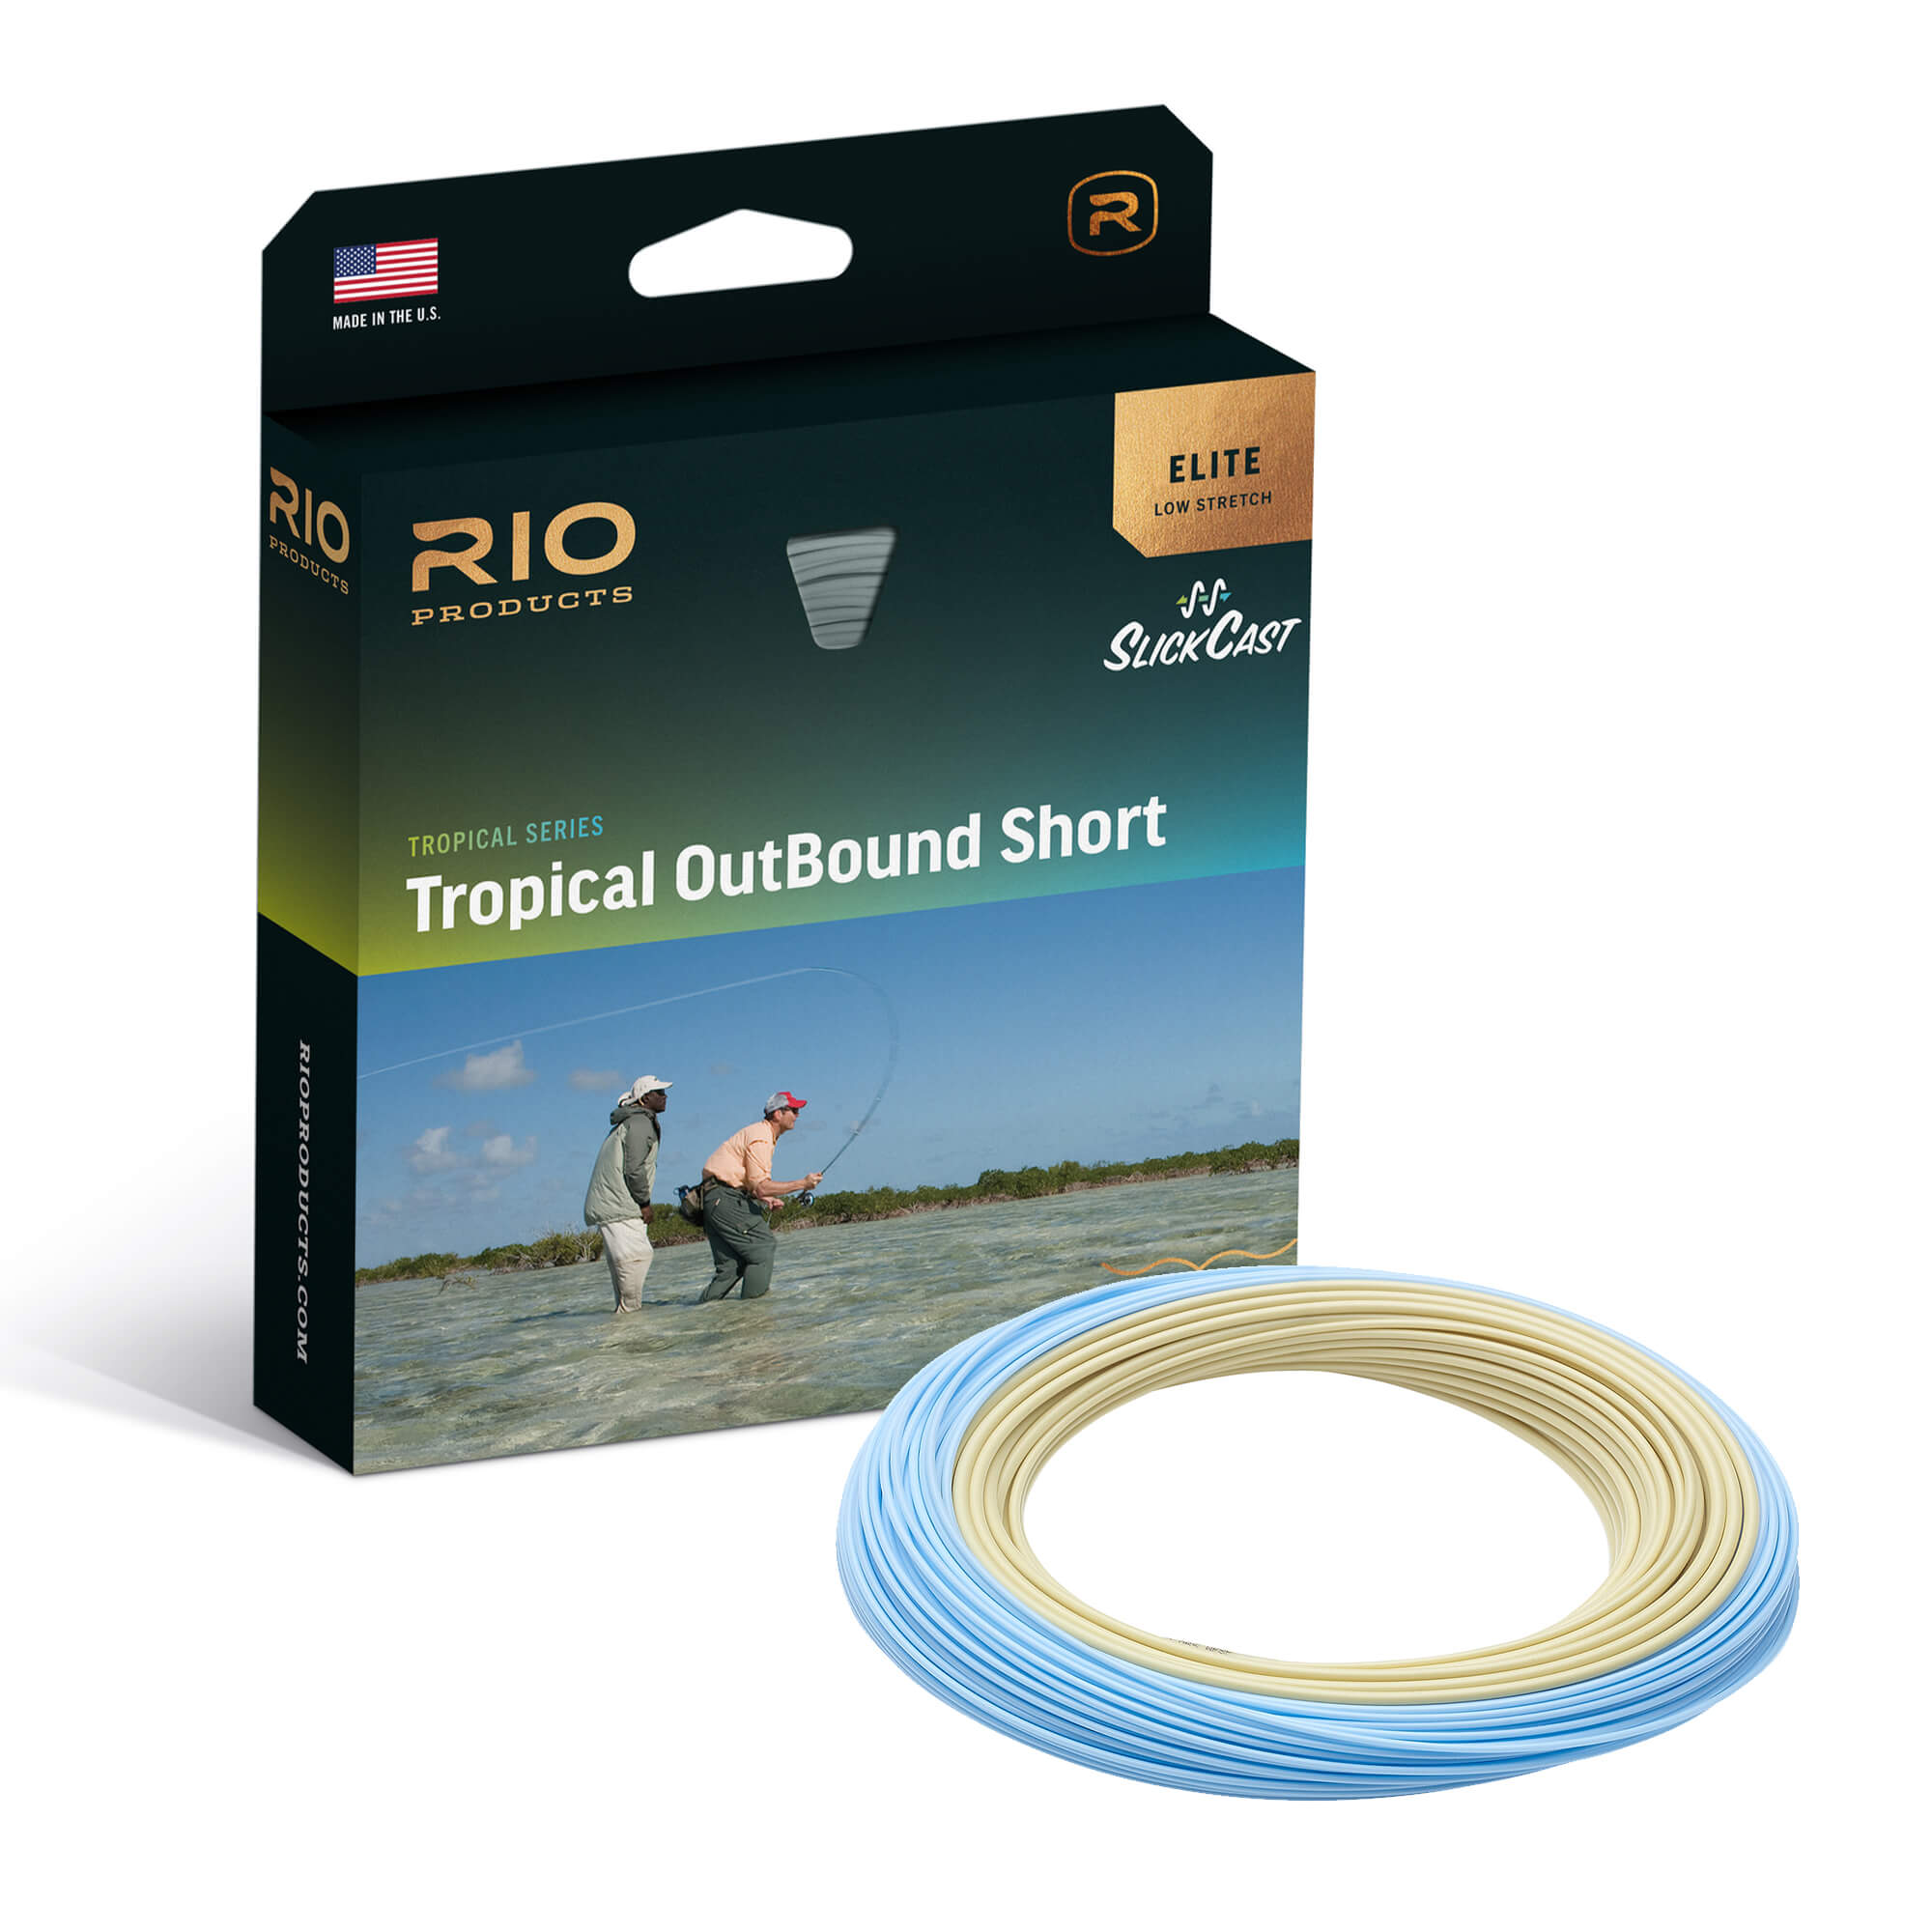 RIO Elite Tropical Outbound Short Fly Line – Guide Flyfishing